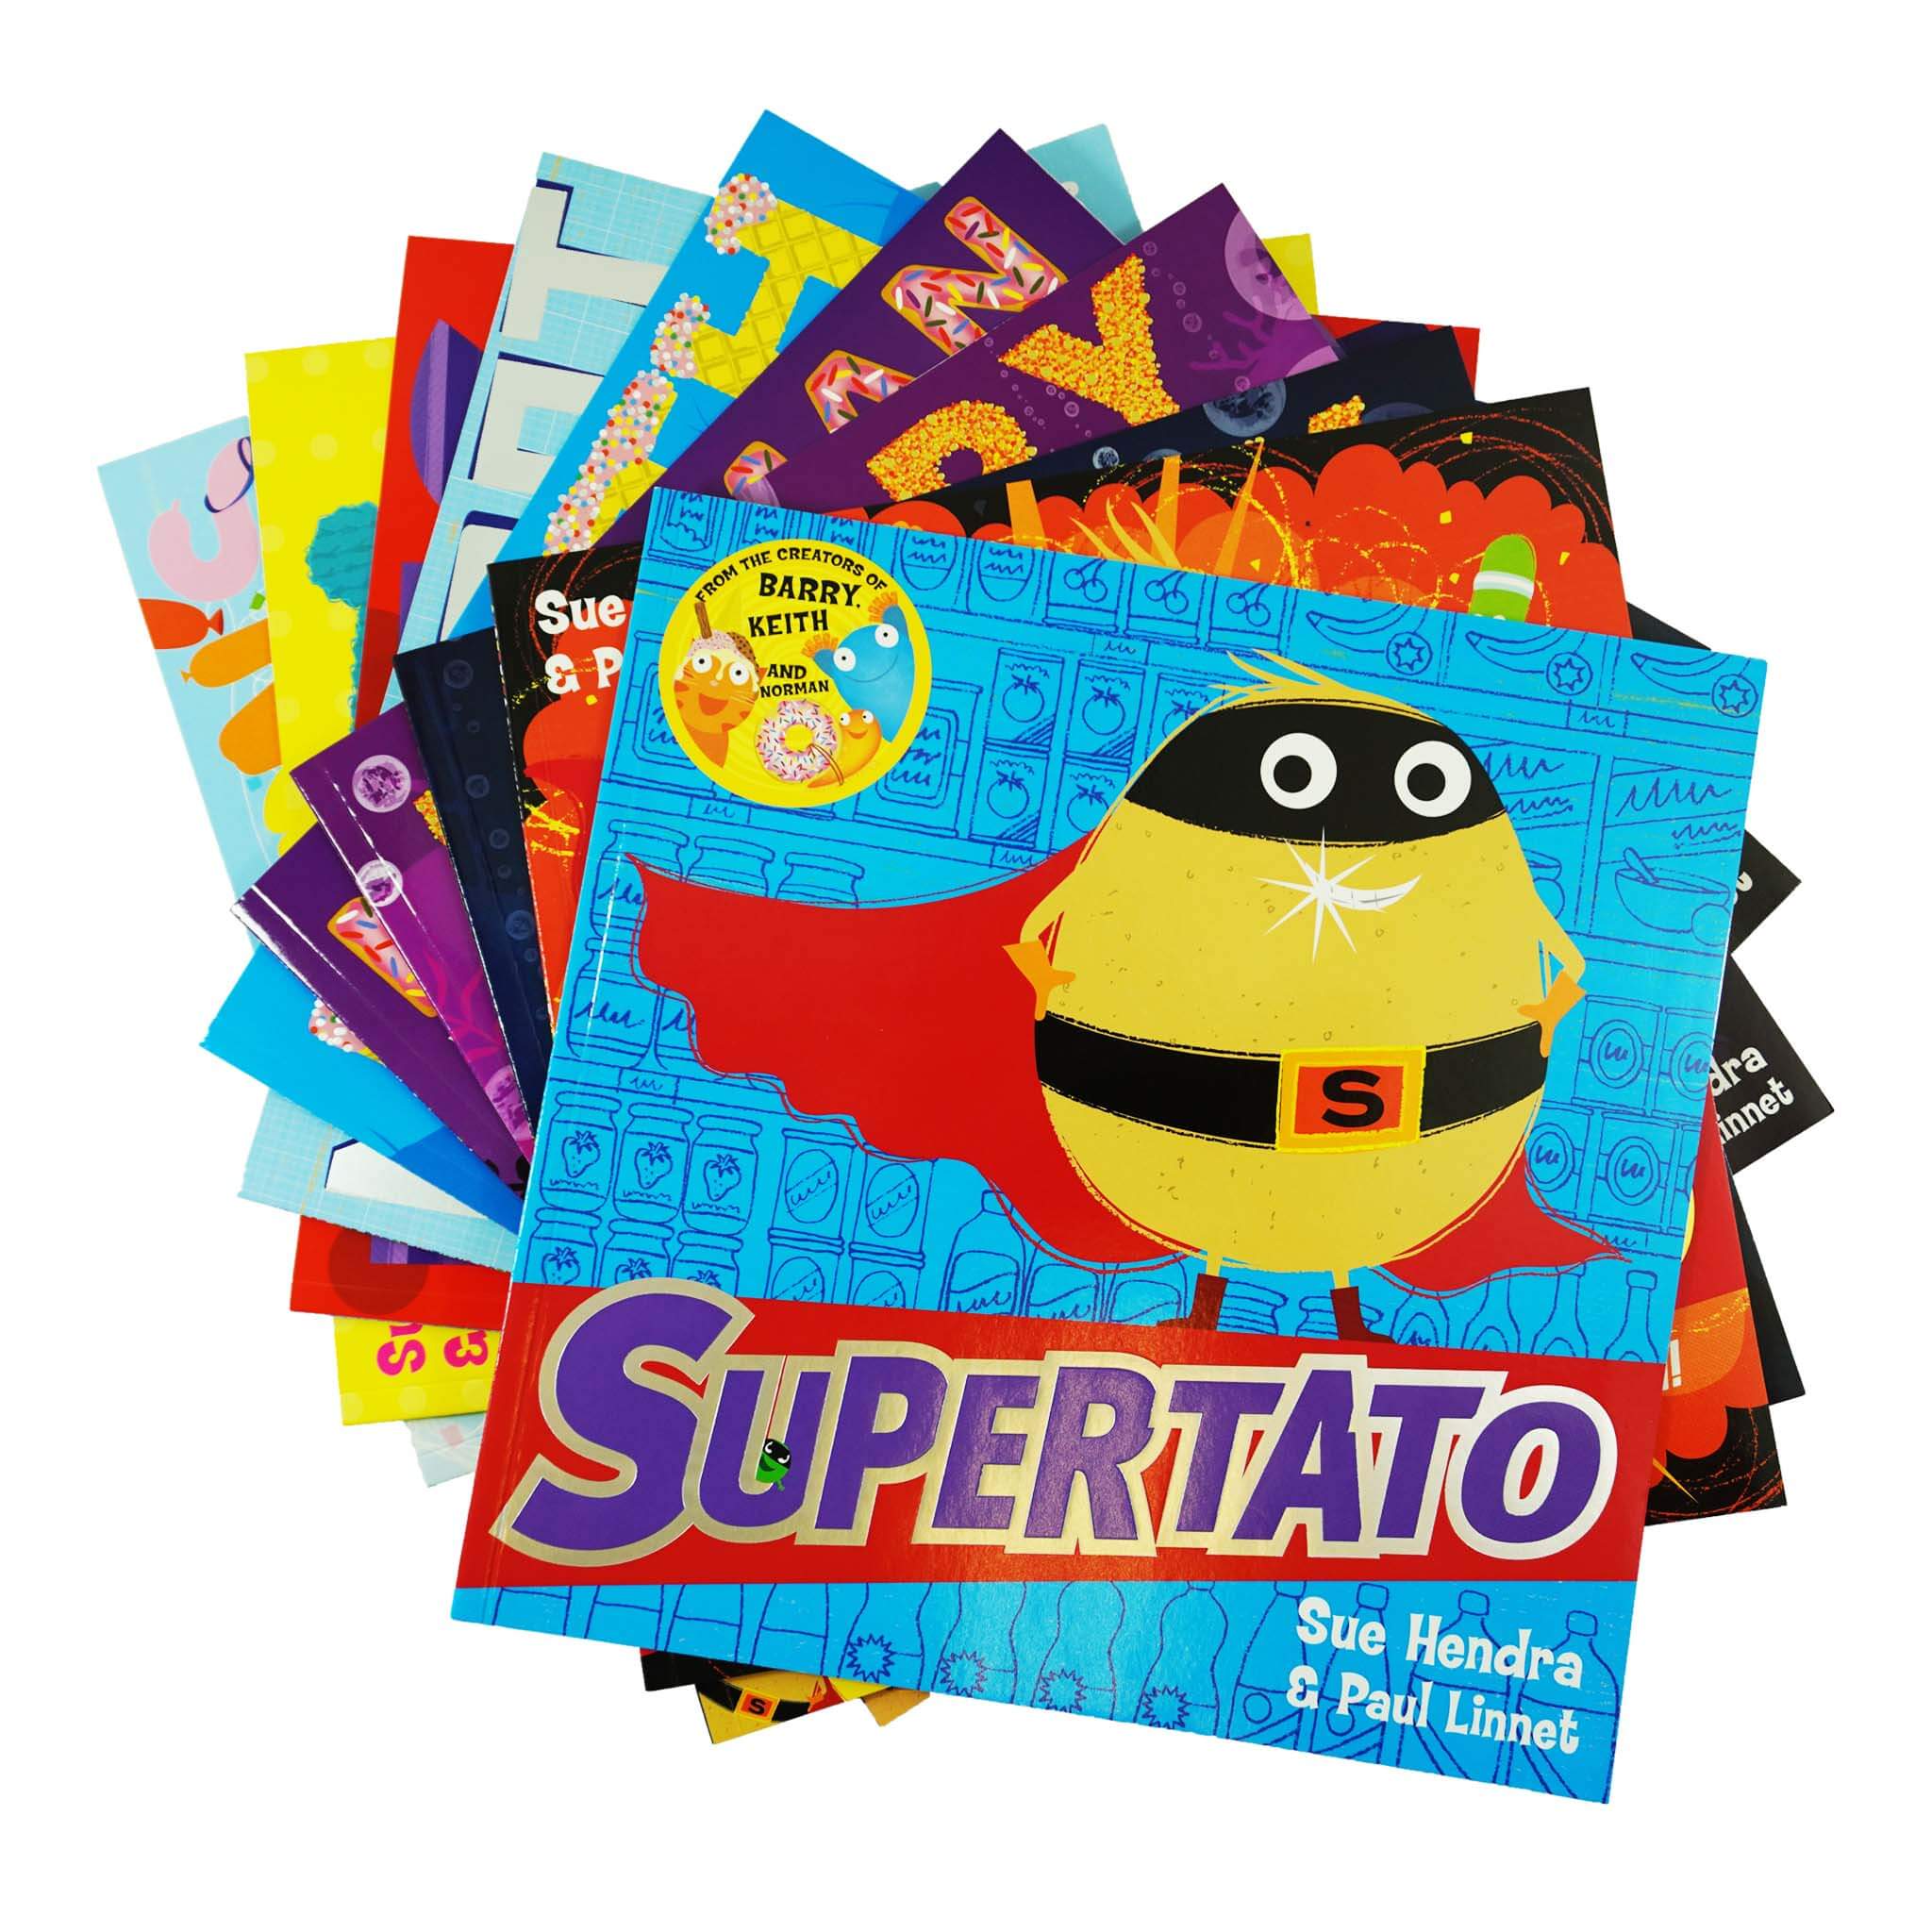 Supertato　Stories　Collection　and　–　Wholesale　Books　By　Other　L　Hendra　Paul　10　Books　Sue　Bangzo